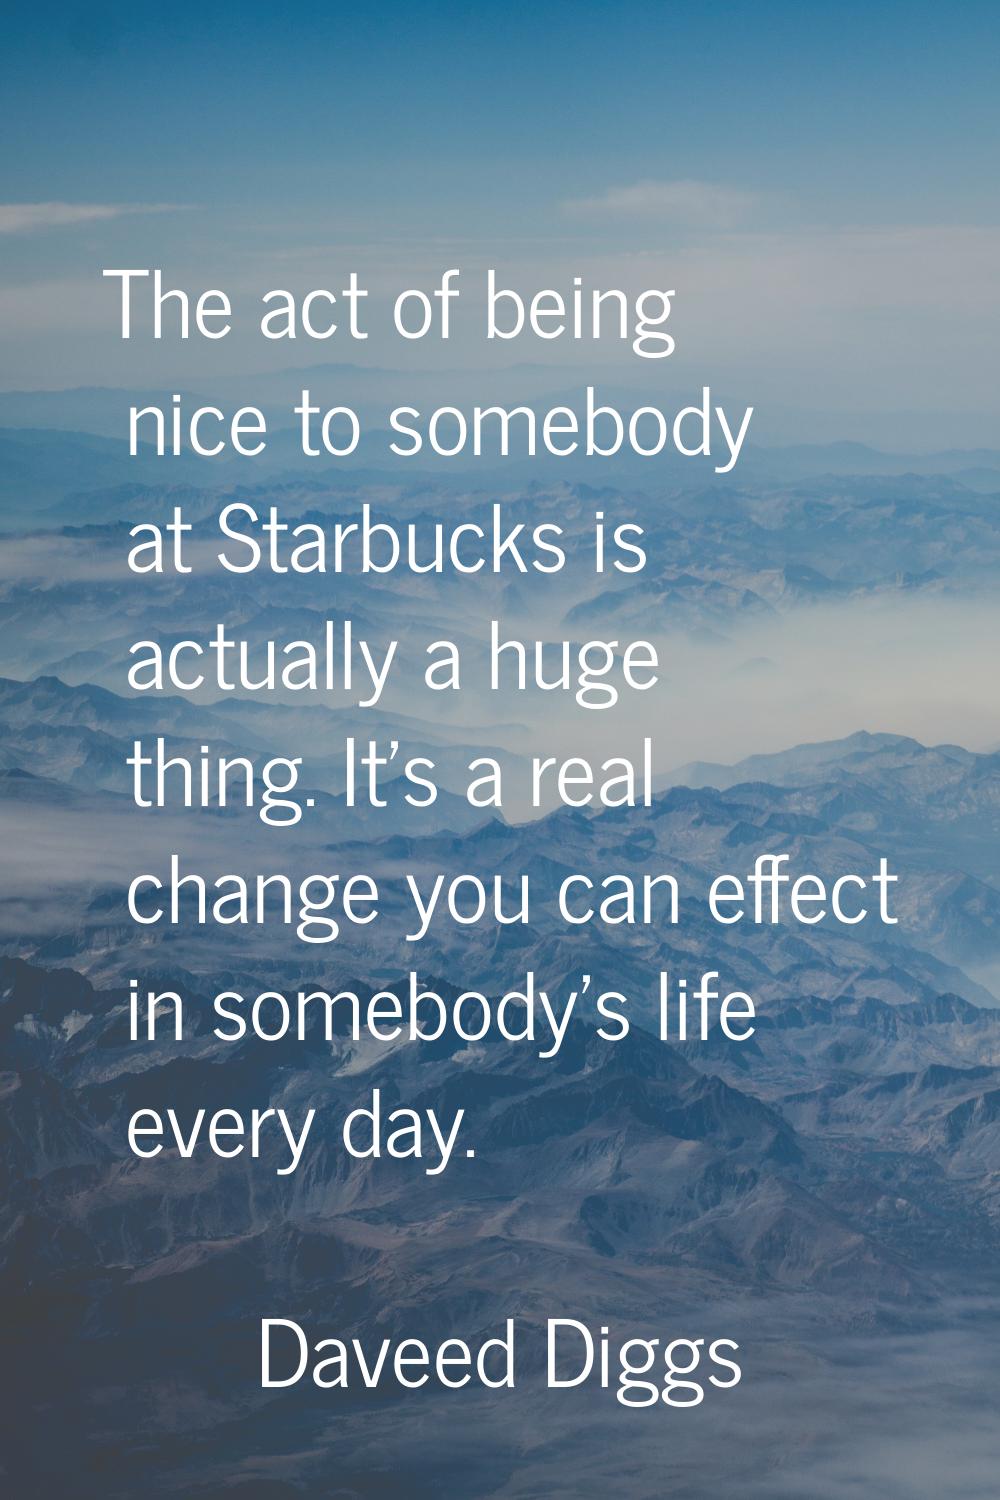 The act of being nice to somebody at Starbucks is actually a huge thing. It's a real change you can